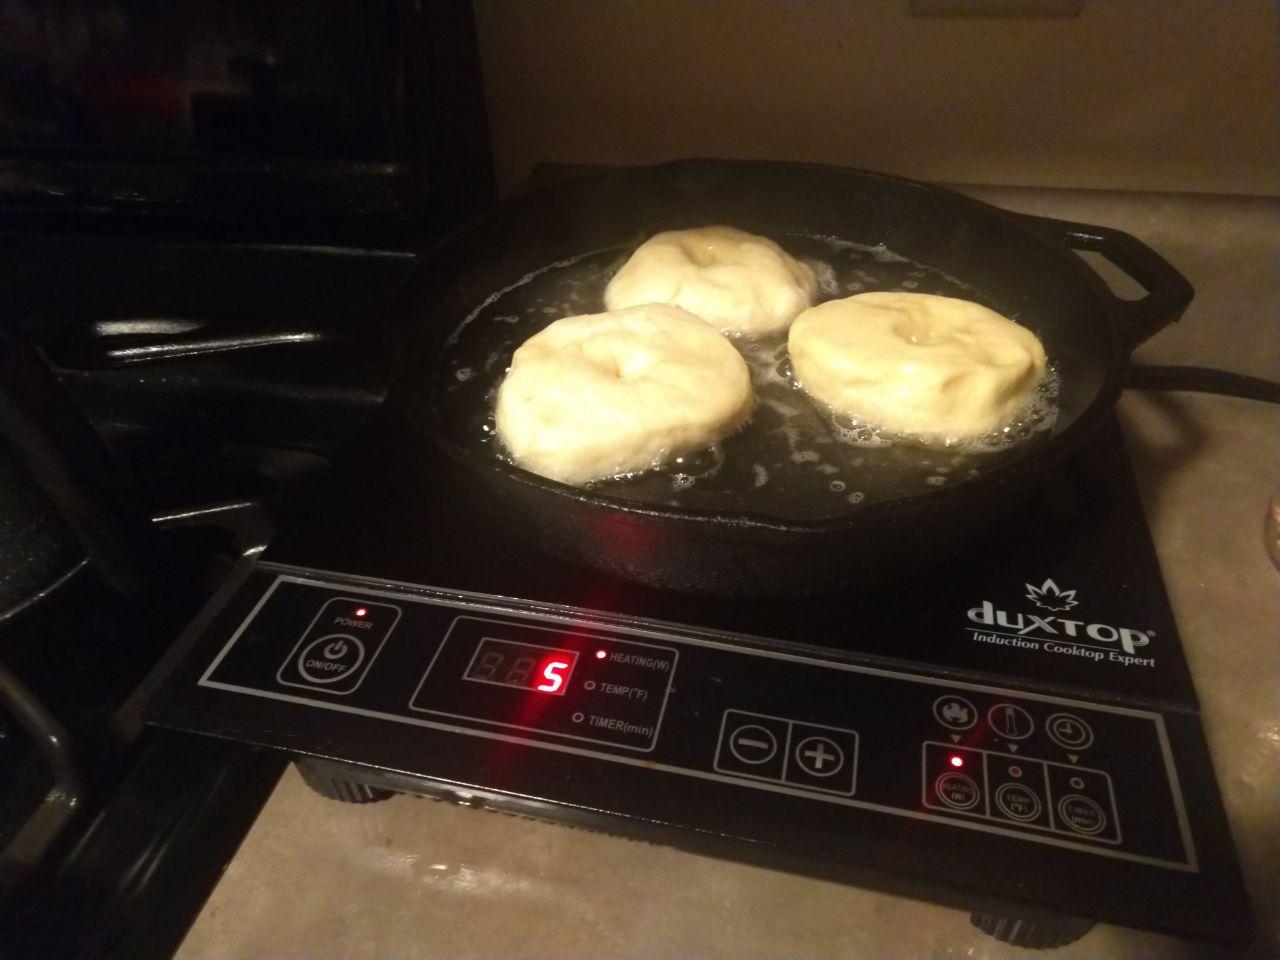 Dontus frying in a cast iron skillet on an induction burner.